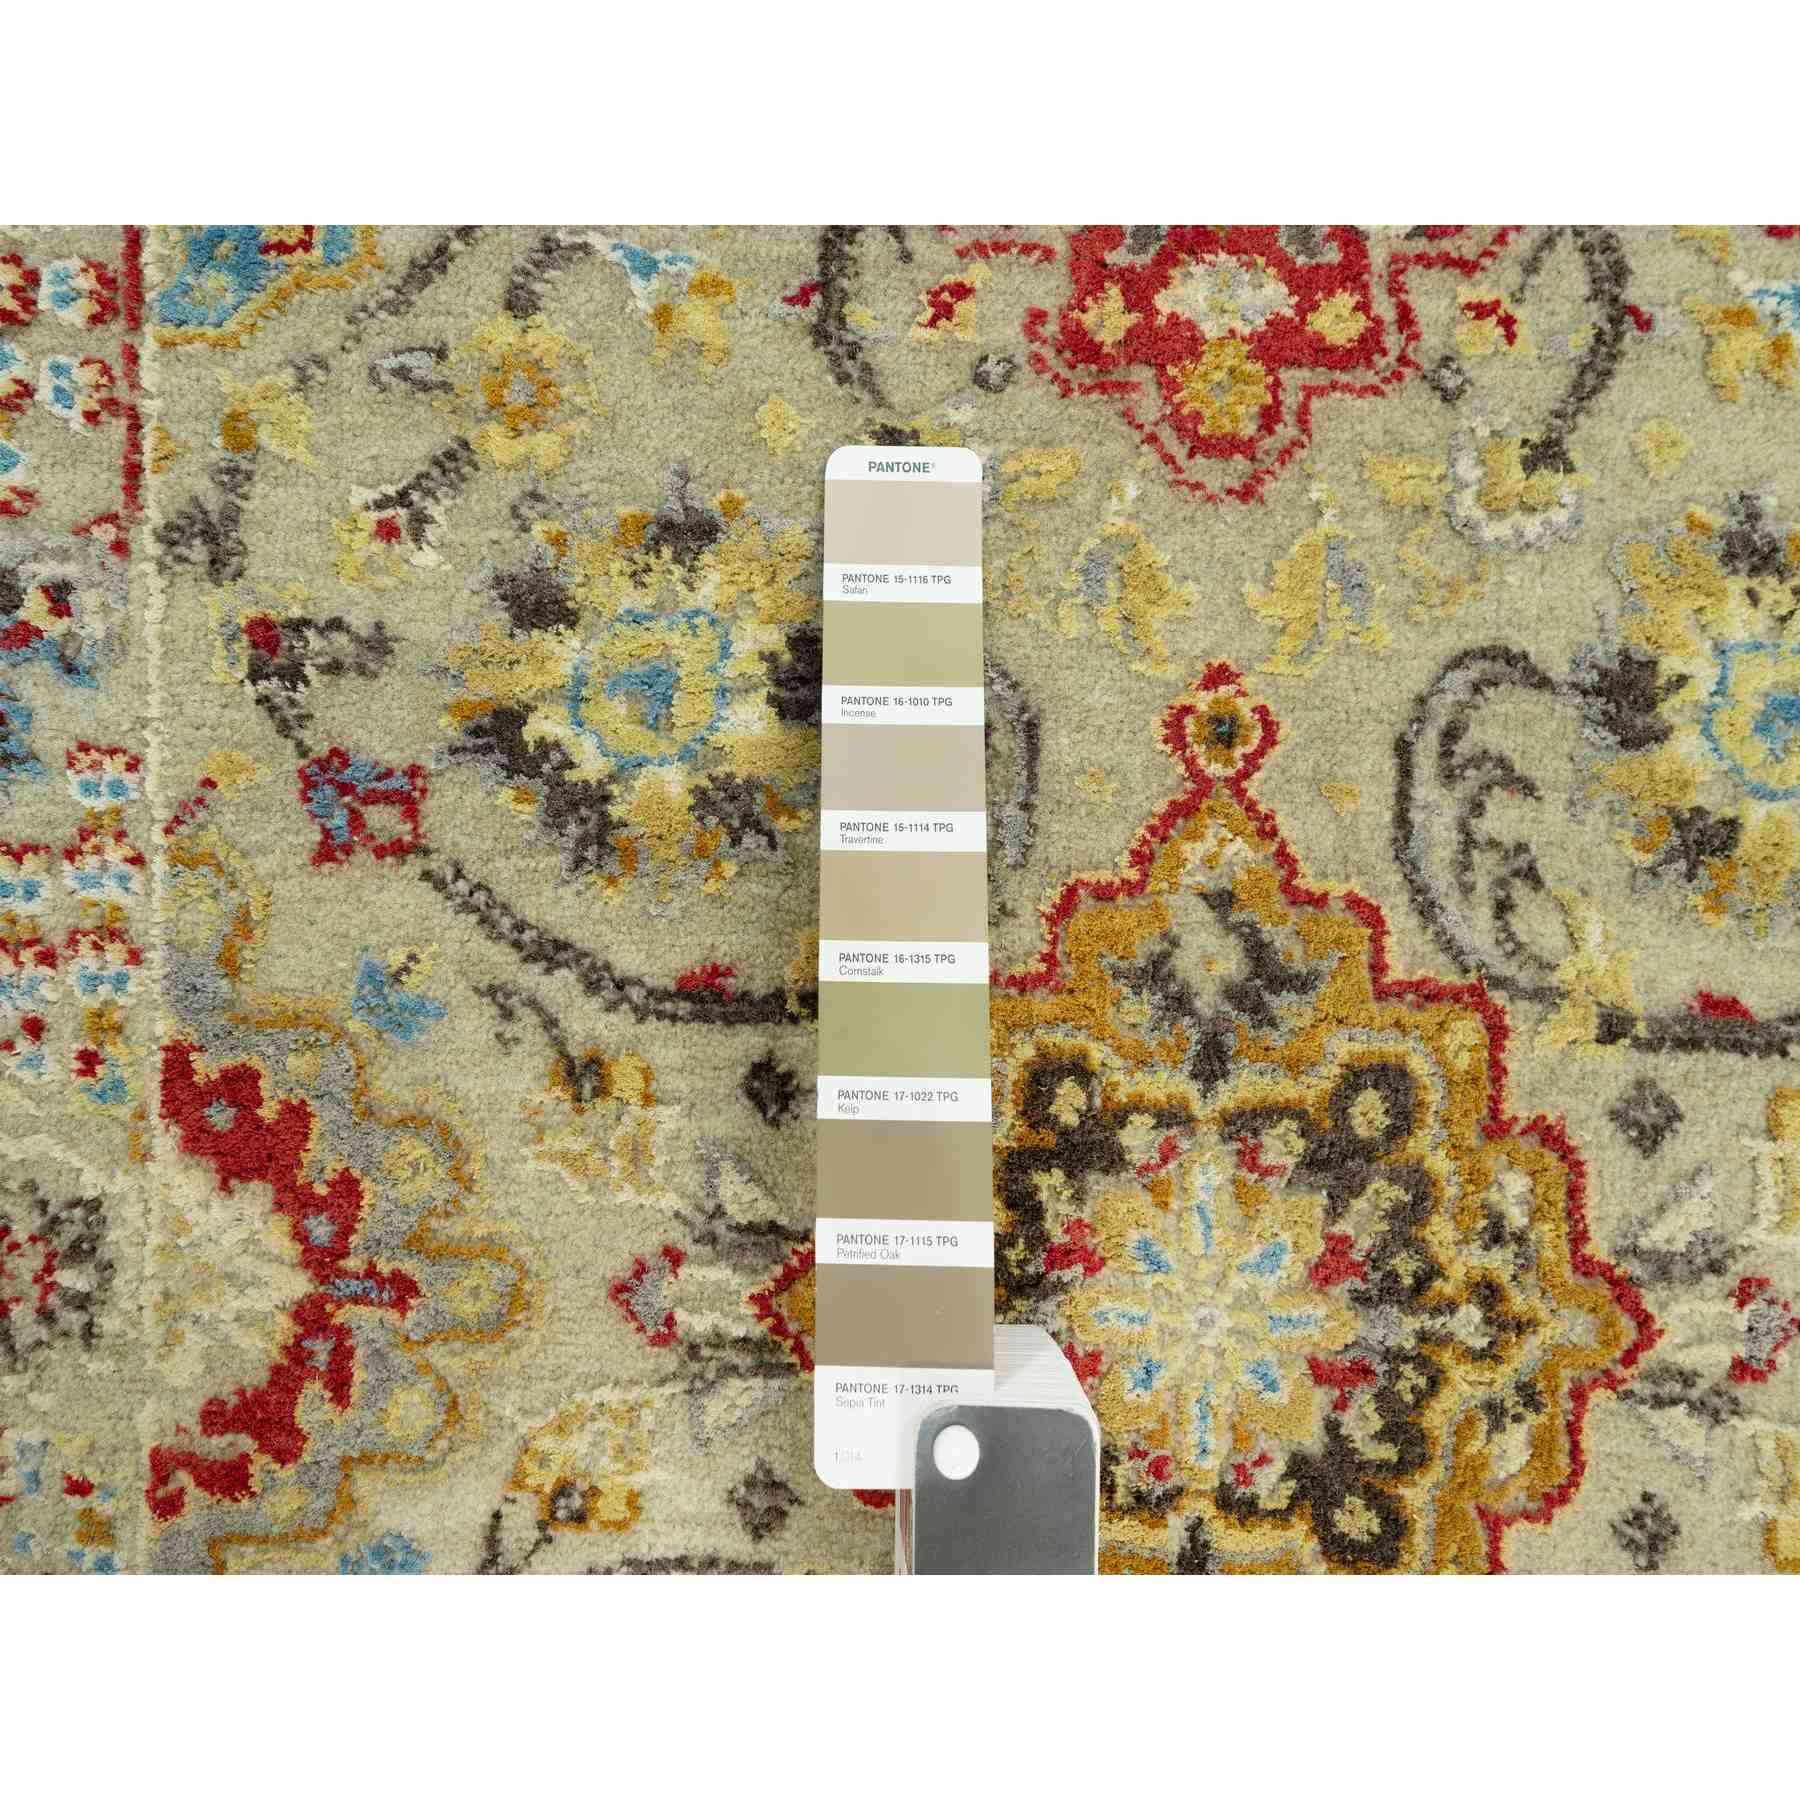 Transitional-Hand-Knotted-Rug-452620